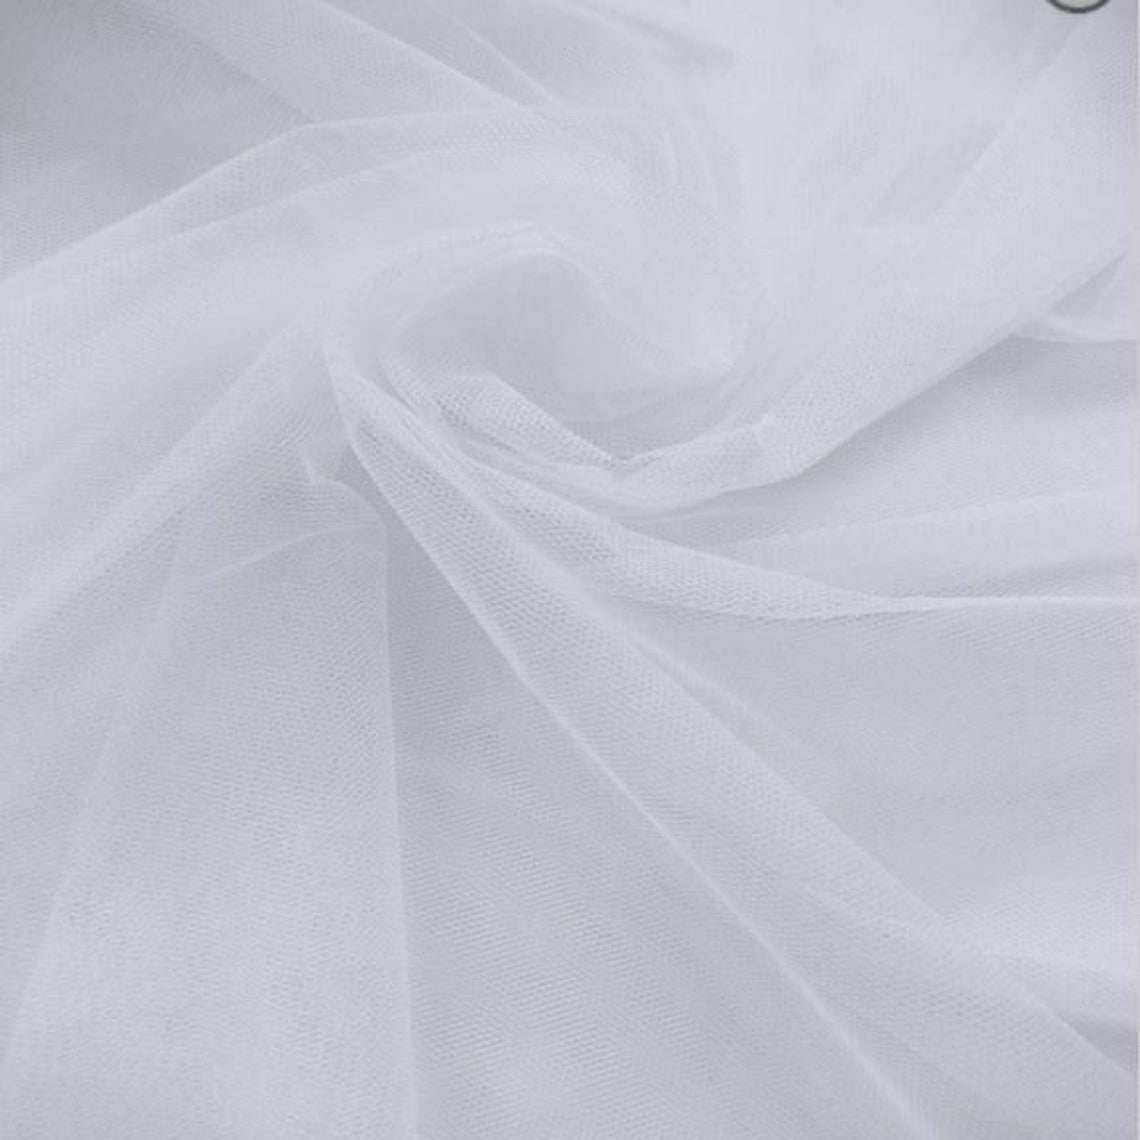 Soft Tulle Fabric, Wedding Tulle Fabric, Net Lace Fabric, Bridal Veil  Fabric, Tulle Party Decoration Background Fabric 